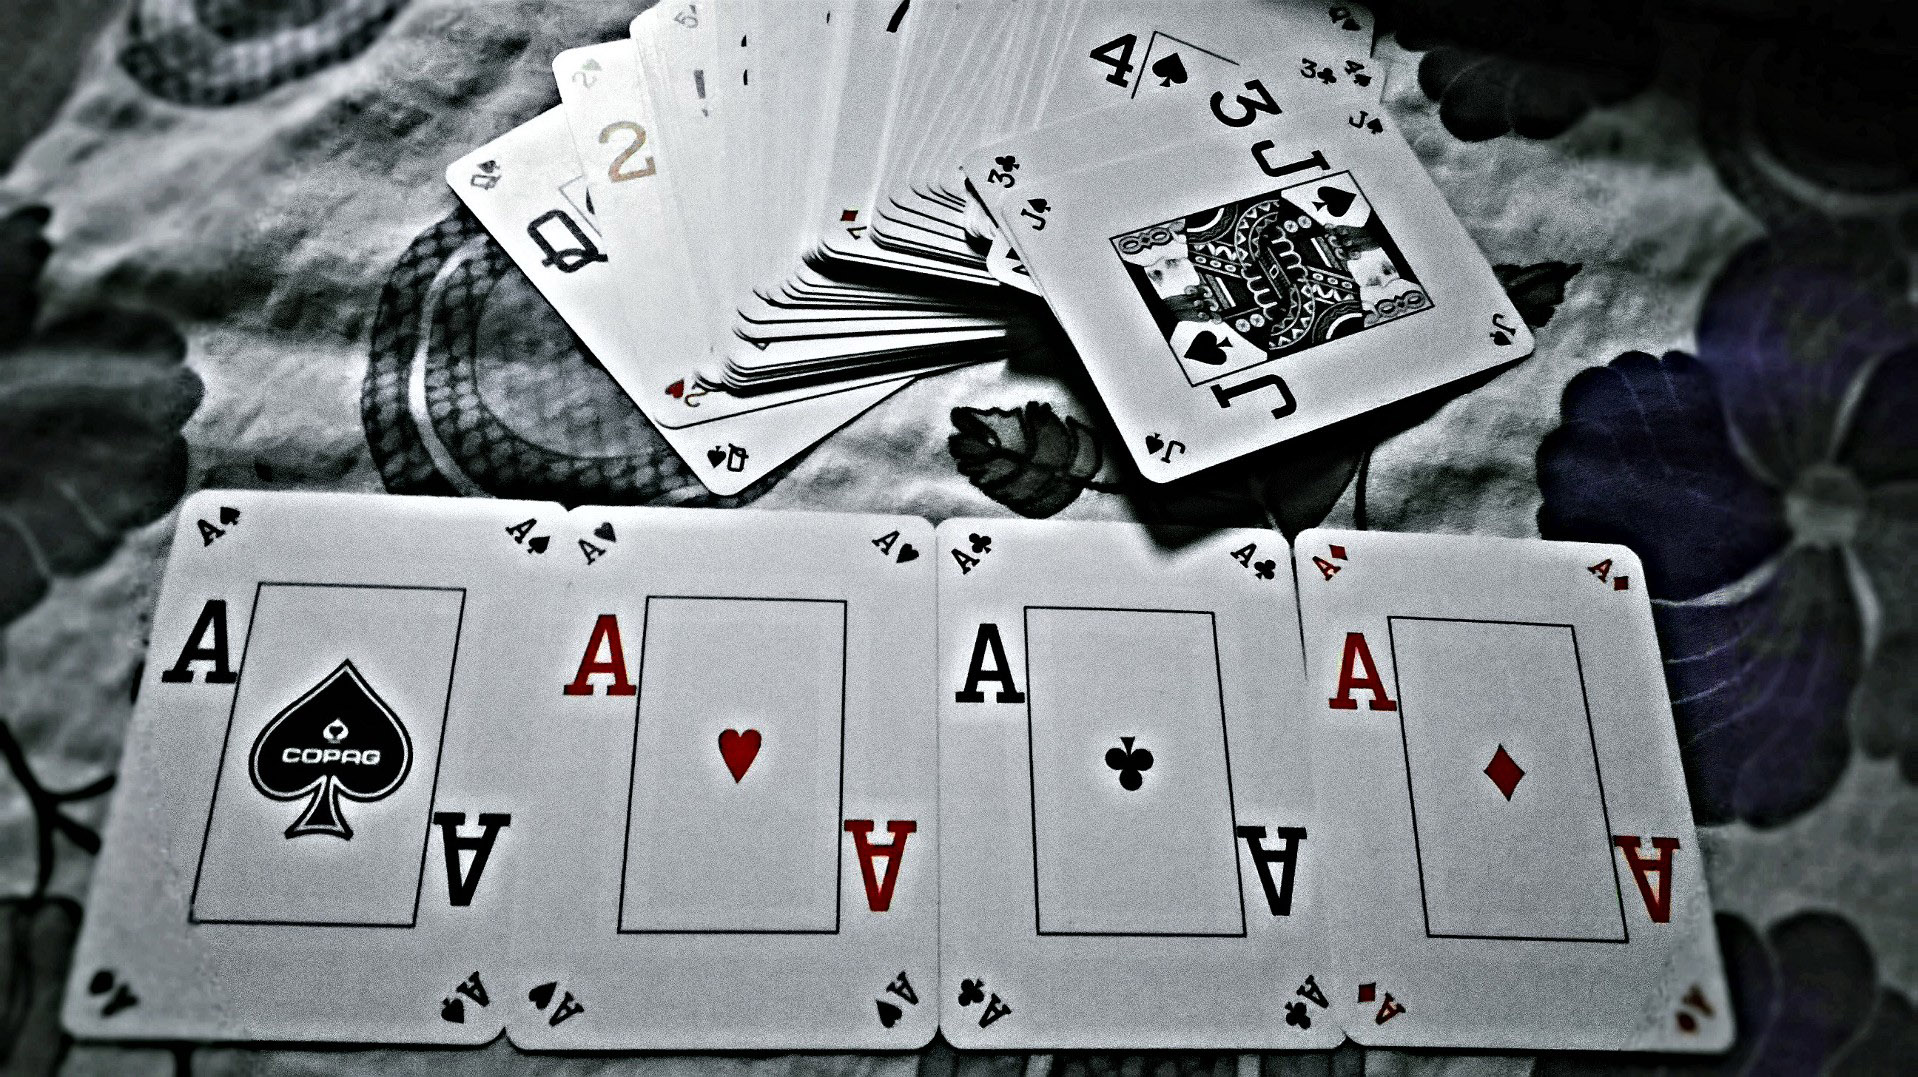 four-aces-from-a-deck-of-cards.jpg